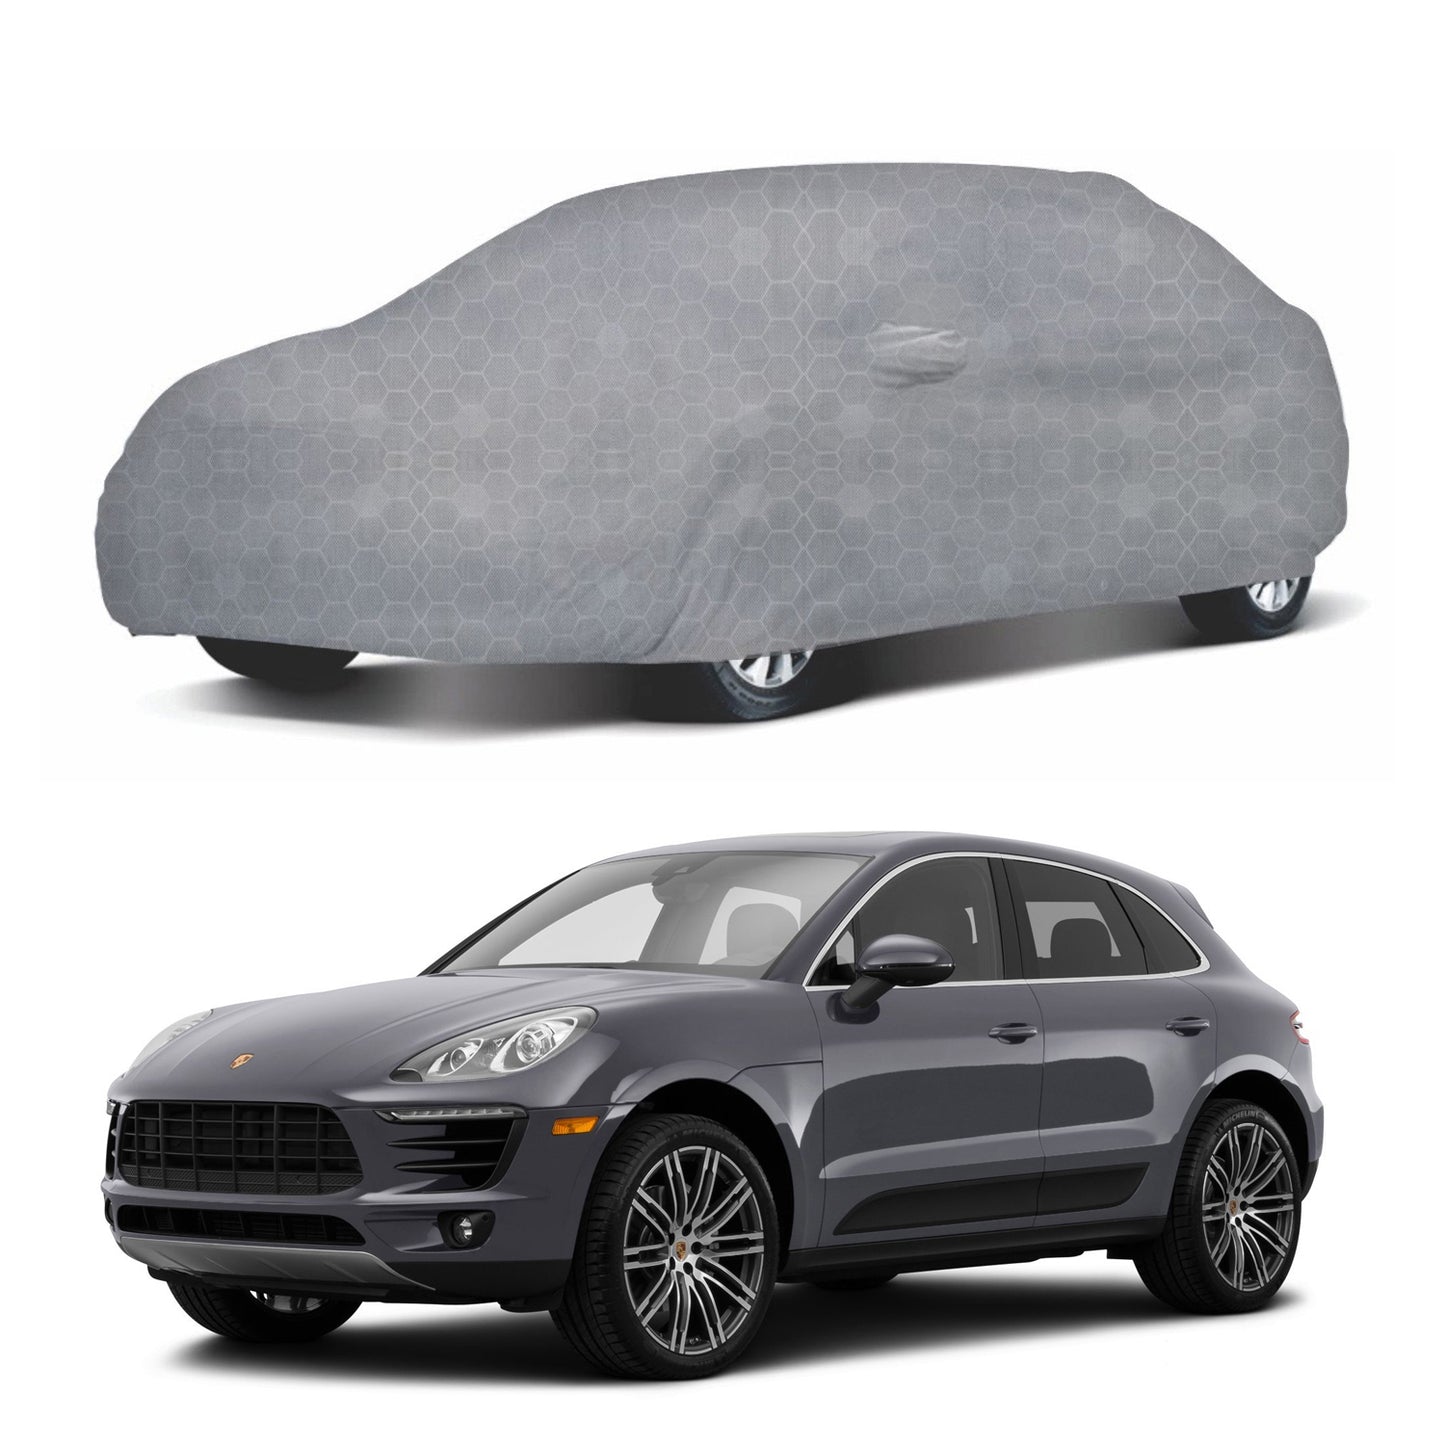 Oshotto 100% Dust Proof, Water Resistant Grey Car Body Cover with Mirror Pocket For Mercedes Benz ML 250/350